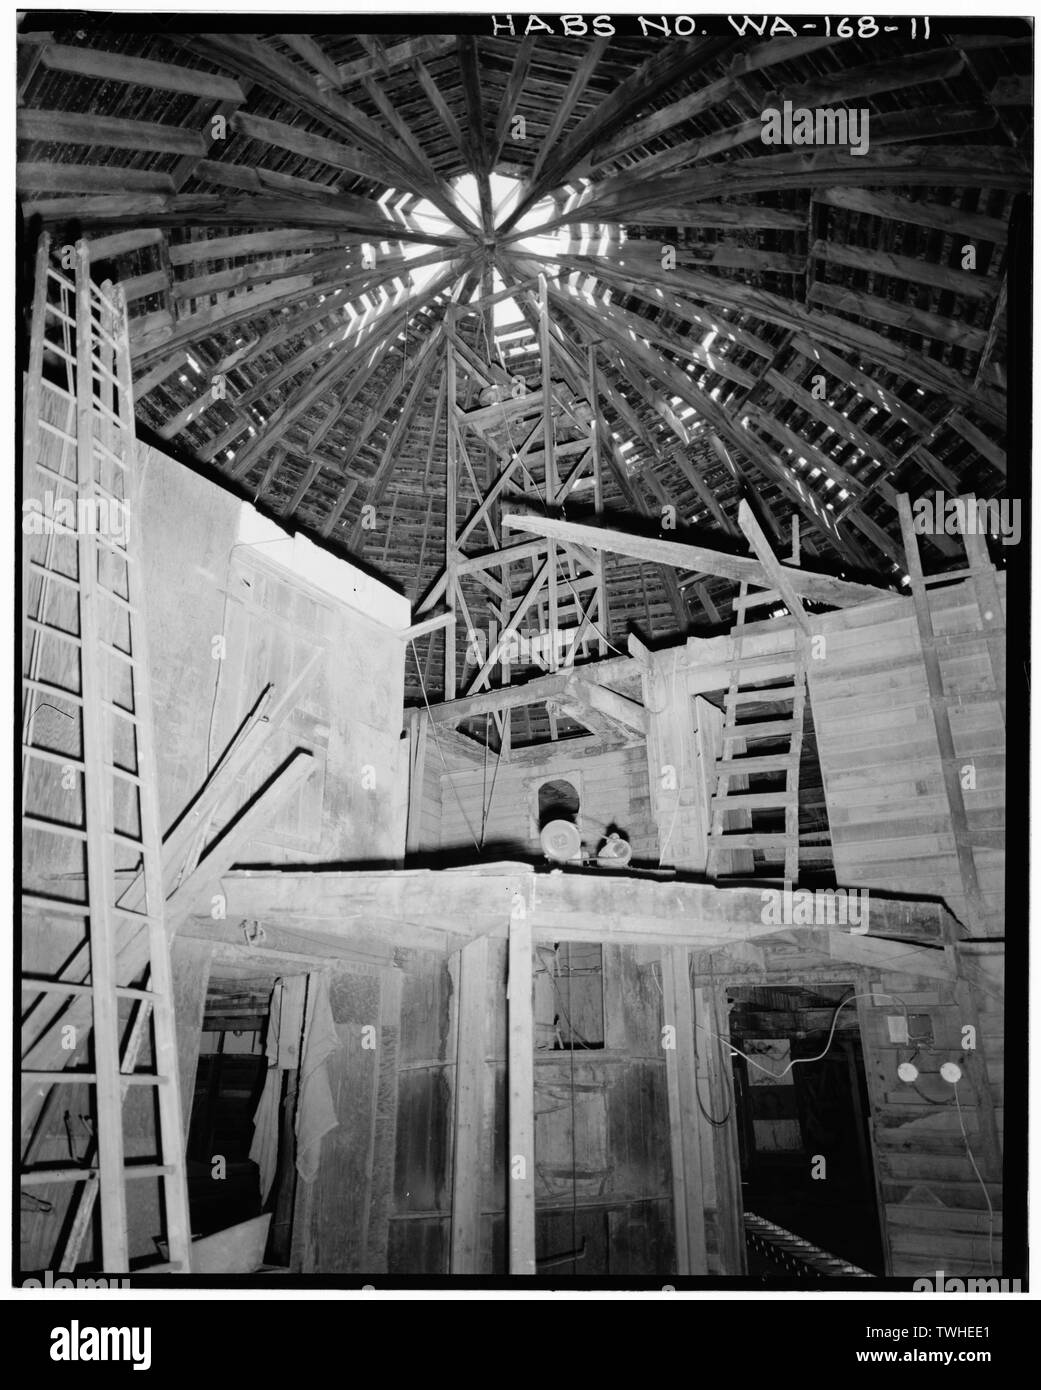 SECOND FLOOR INTERIOR LOOKING NORTH NORTHEAST - T. A. Leonard Barn, Old Moscow Highway, Pullman, Whitman County, WA; Cline, James H; Rudd, J William, project manager; Washington State University, School of Architecture, sponsor; Nys, Steven Eric, delineator; Burger, David M, delineator Stock Photo